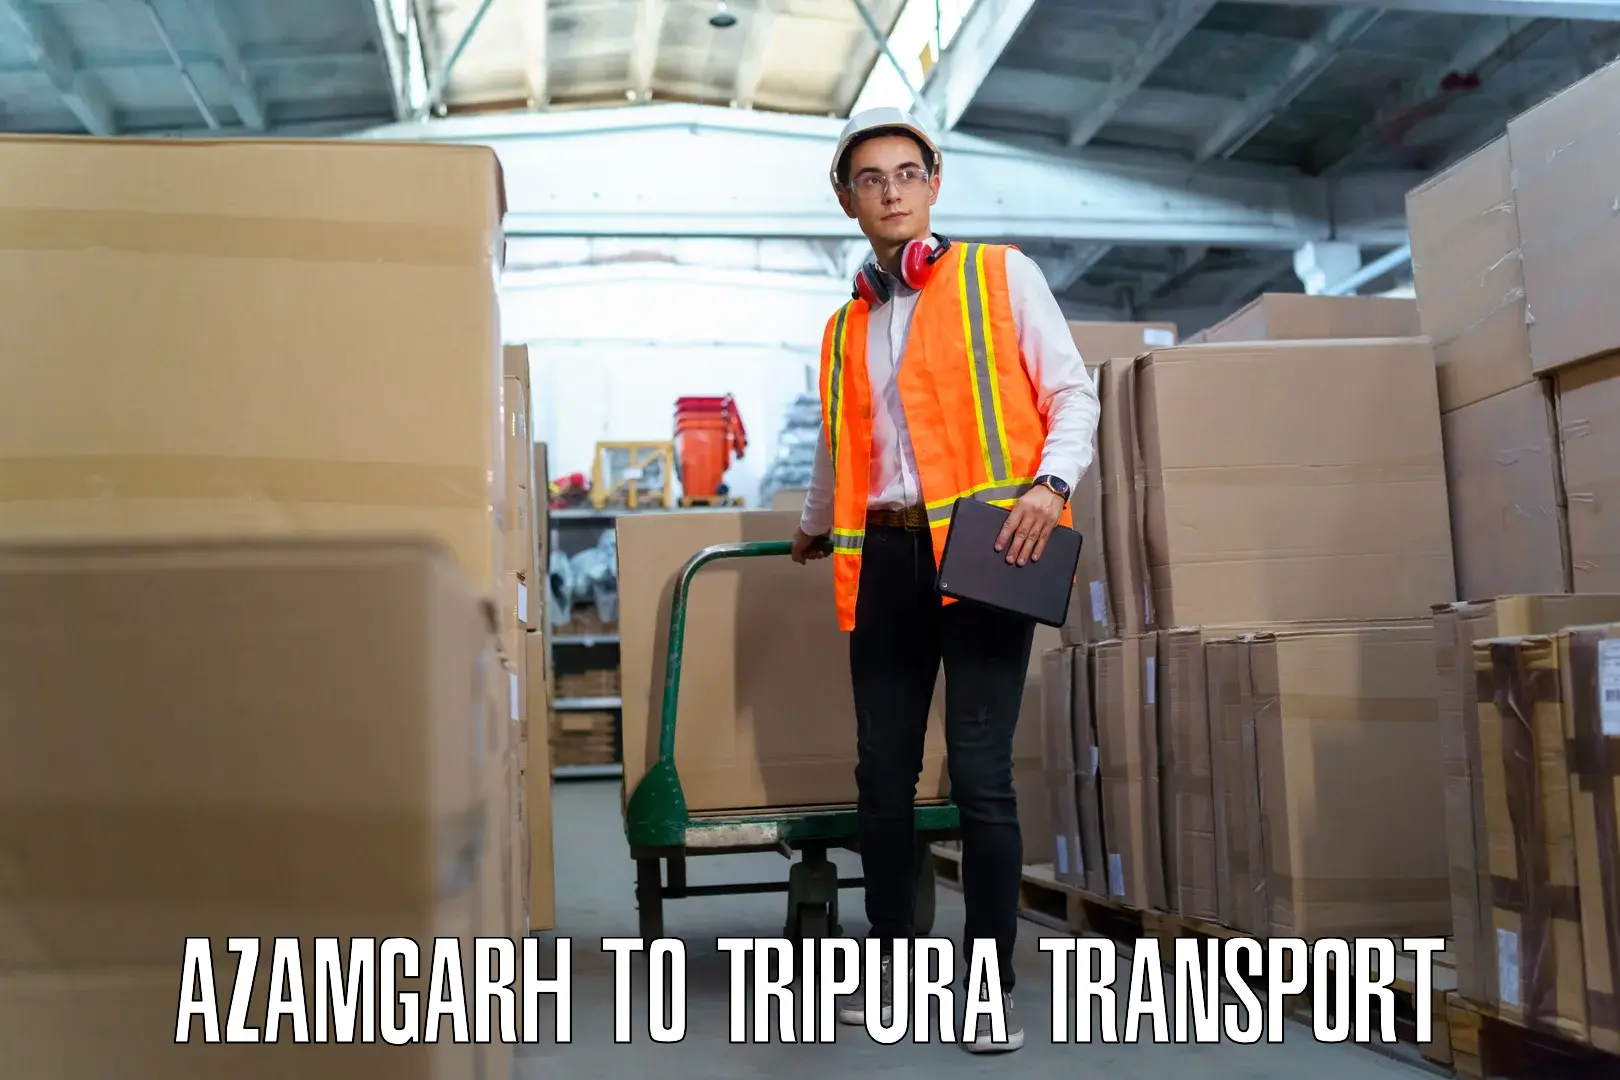 Delivery service Azamgarh to Udaipur Tripura